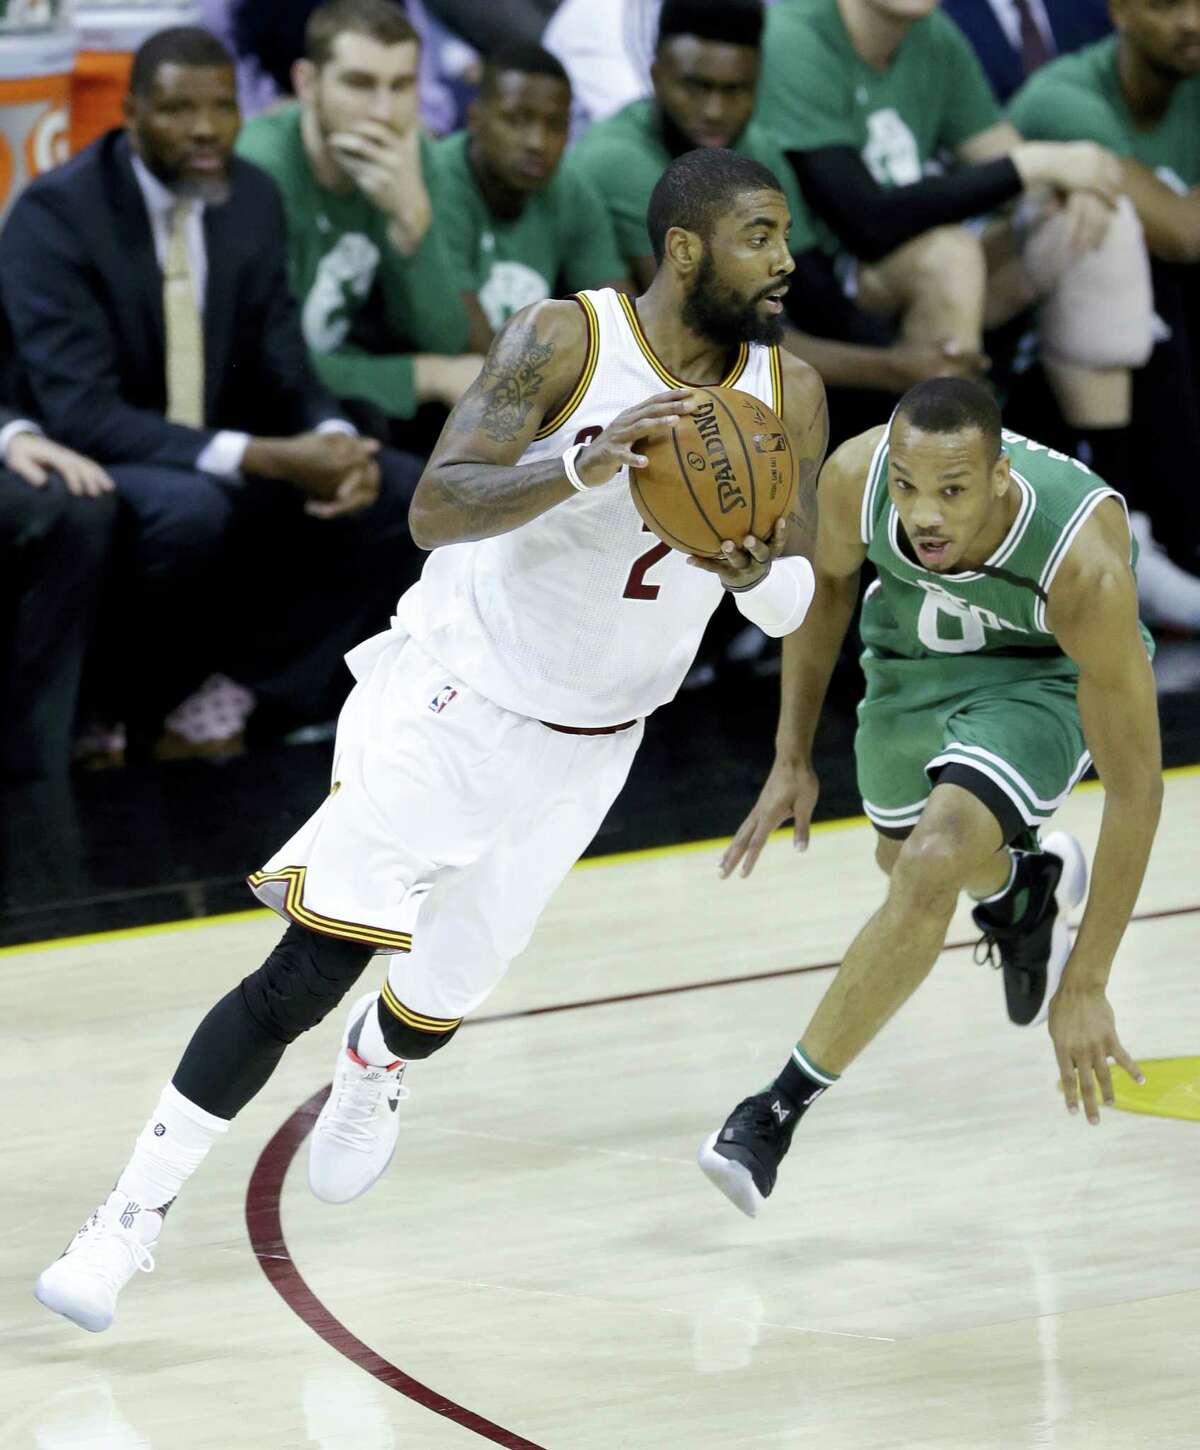 Cleveland Cavaliers’ Kyrie Irving (2) drives against Boston Celtics’ Avery Bradley (0) during the first half of Game 4 of the NBA basketball Eastern Conference finals on May 23, 2017 in Cleveland.